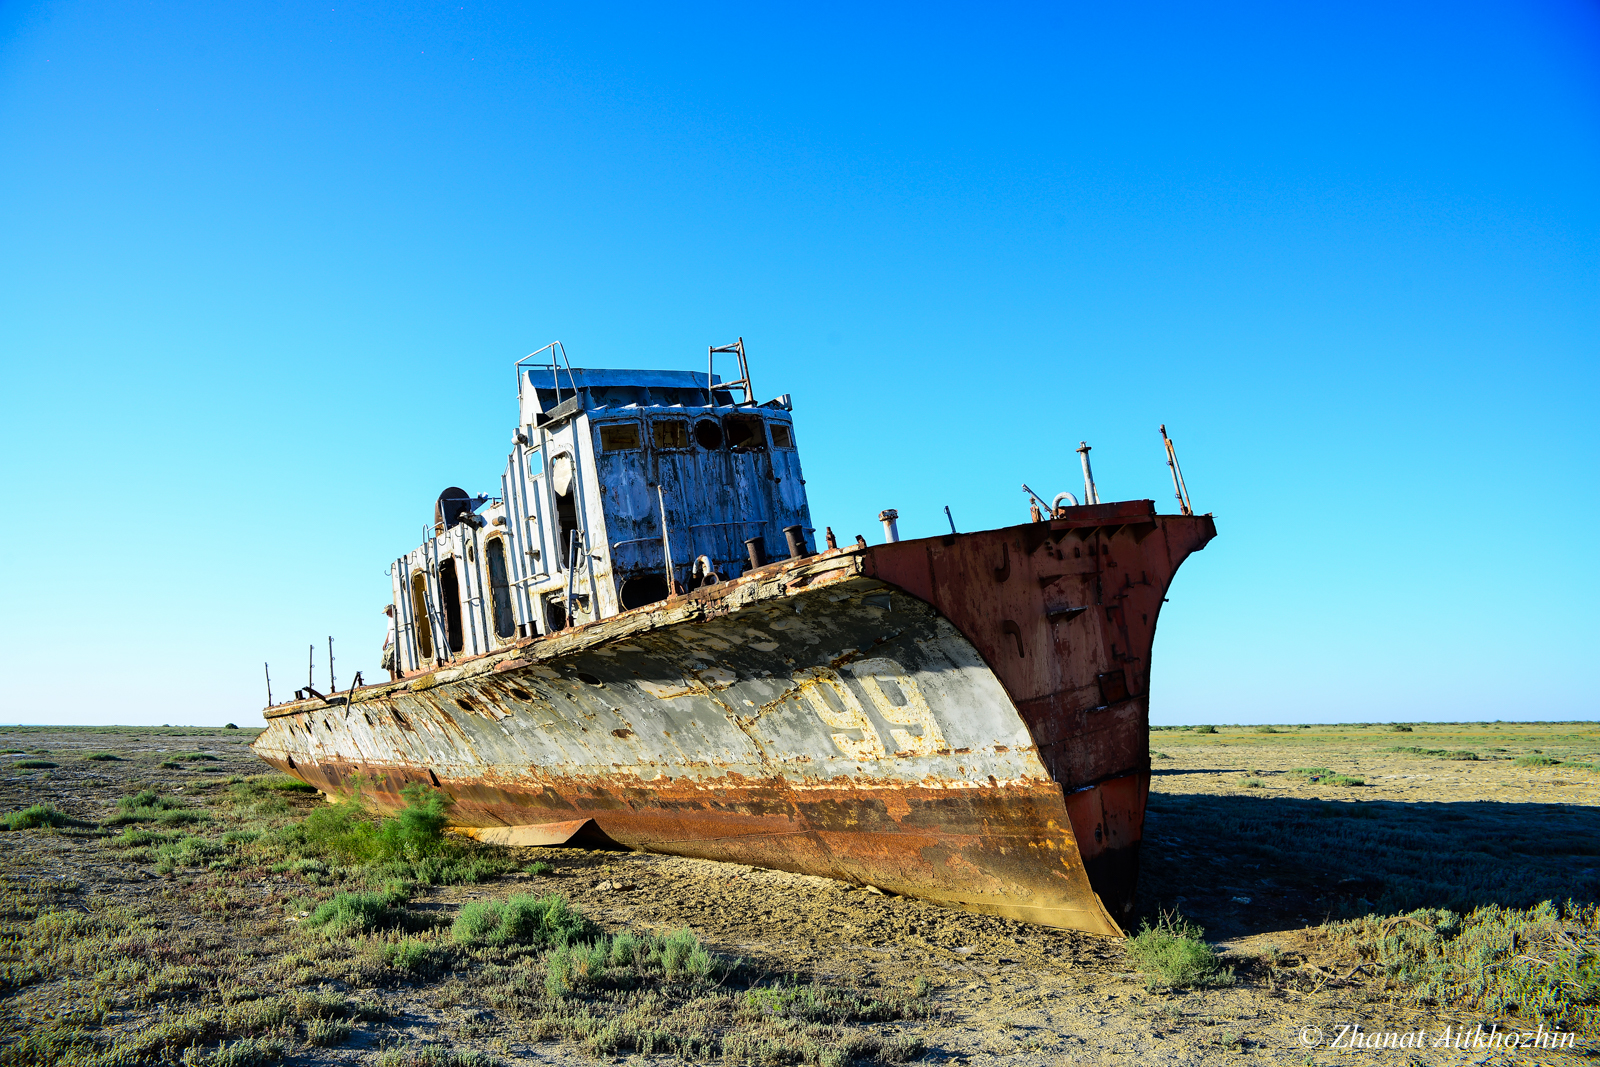 QazGeo to launch expeditions to Aral Sea, sacred Kazakh places - The